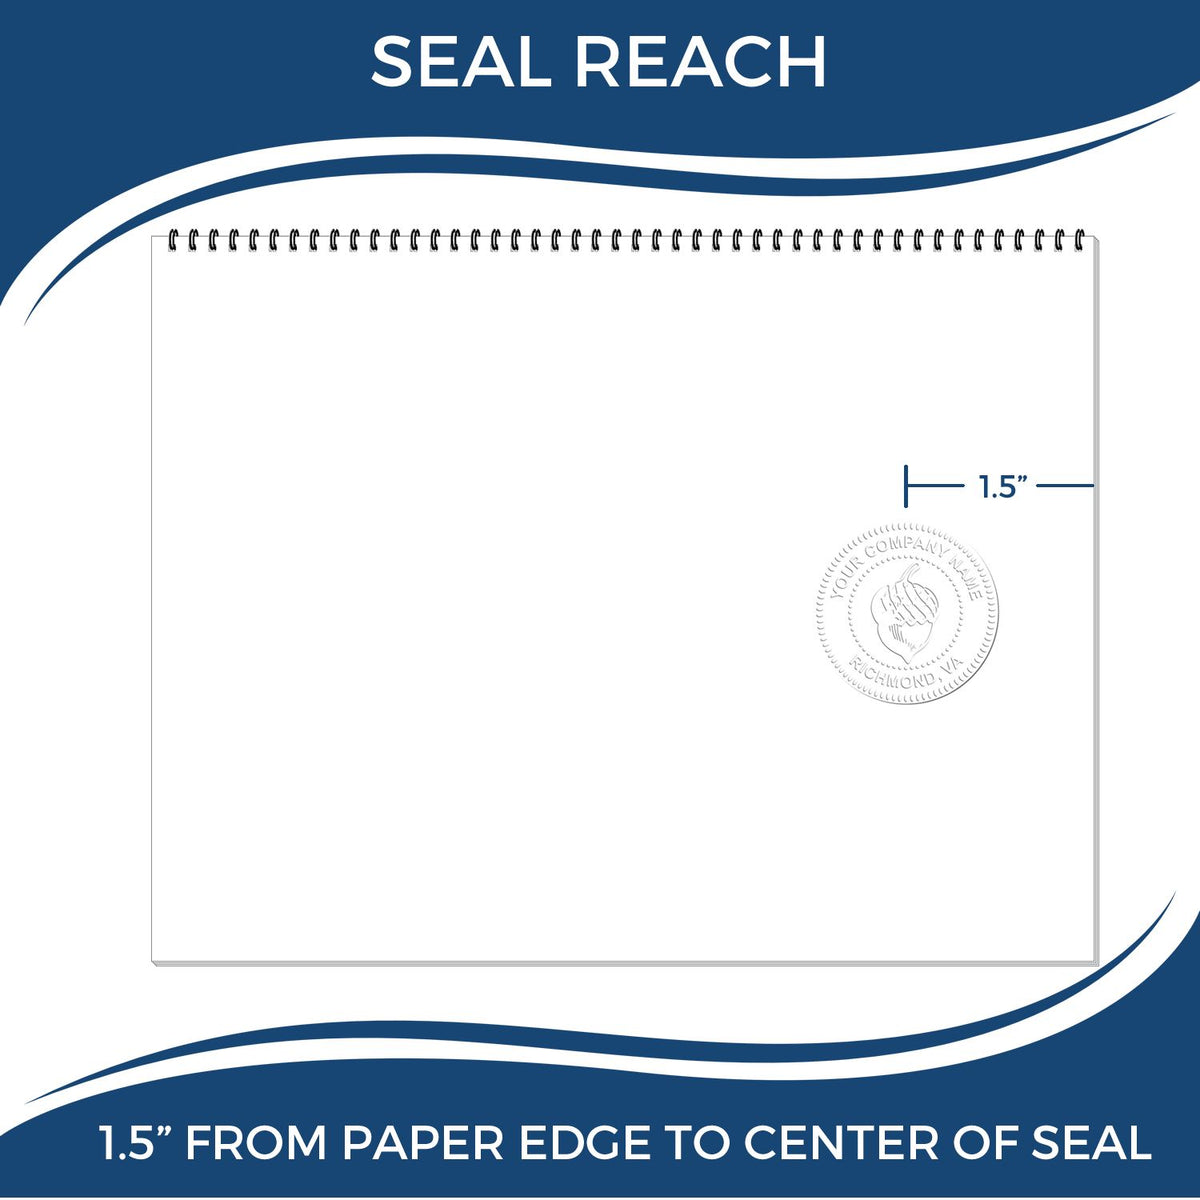 An infographic showing the seal reach which is represented by a ruler and a miniature seal image of the Hybrid Florida Architect Seal